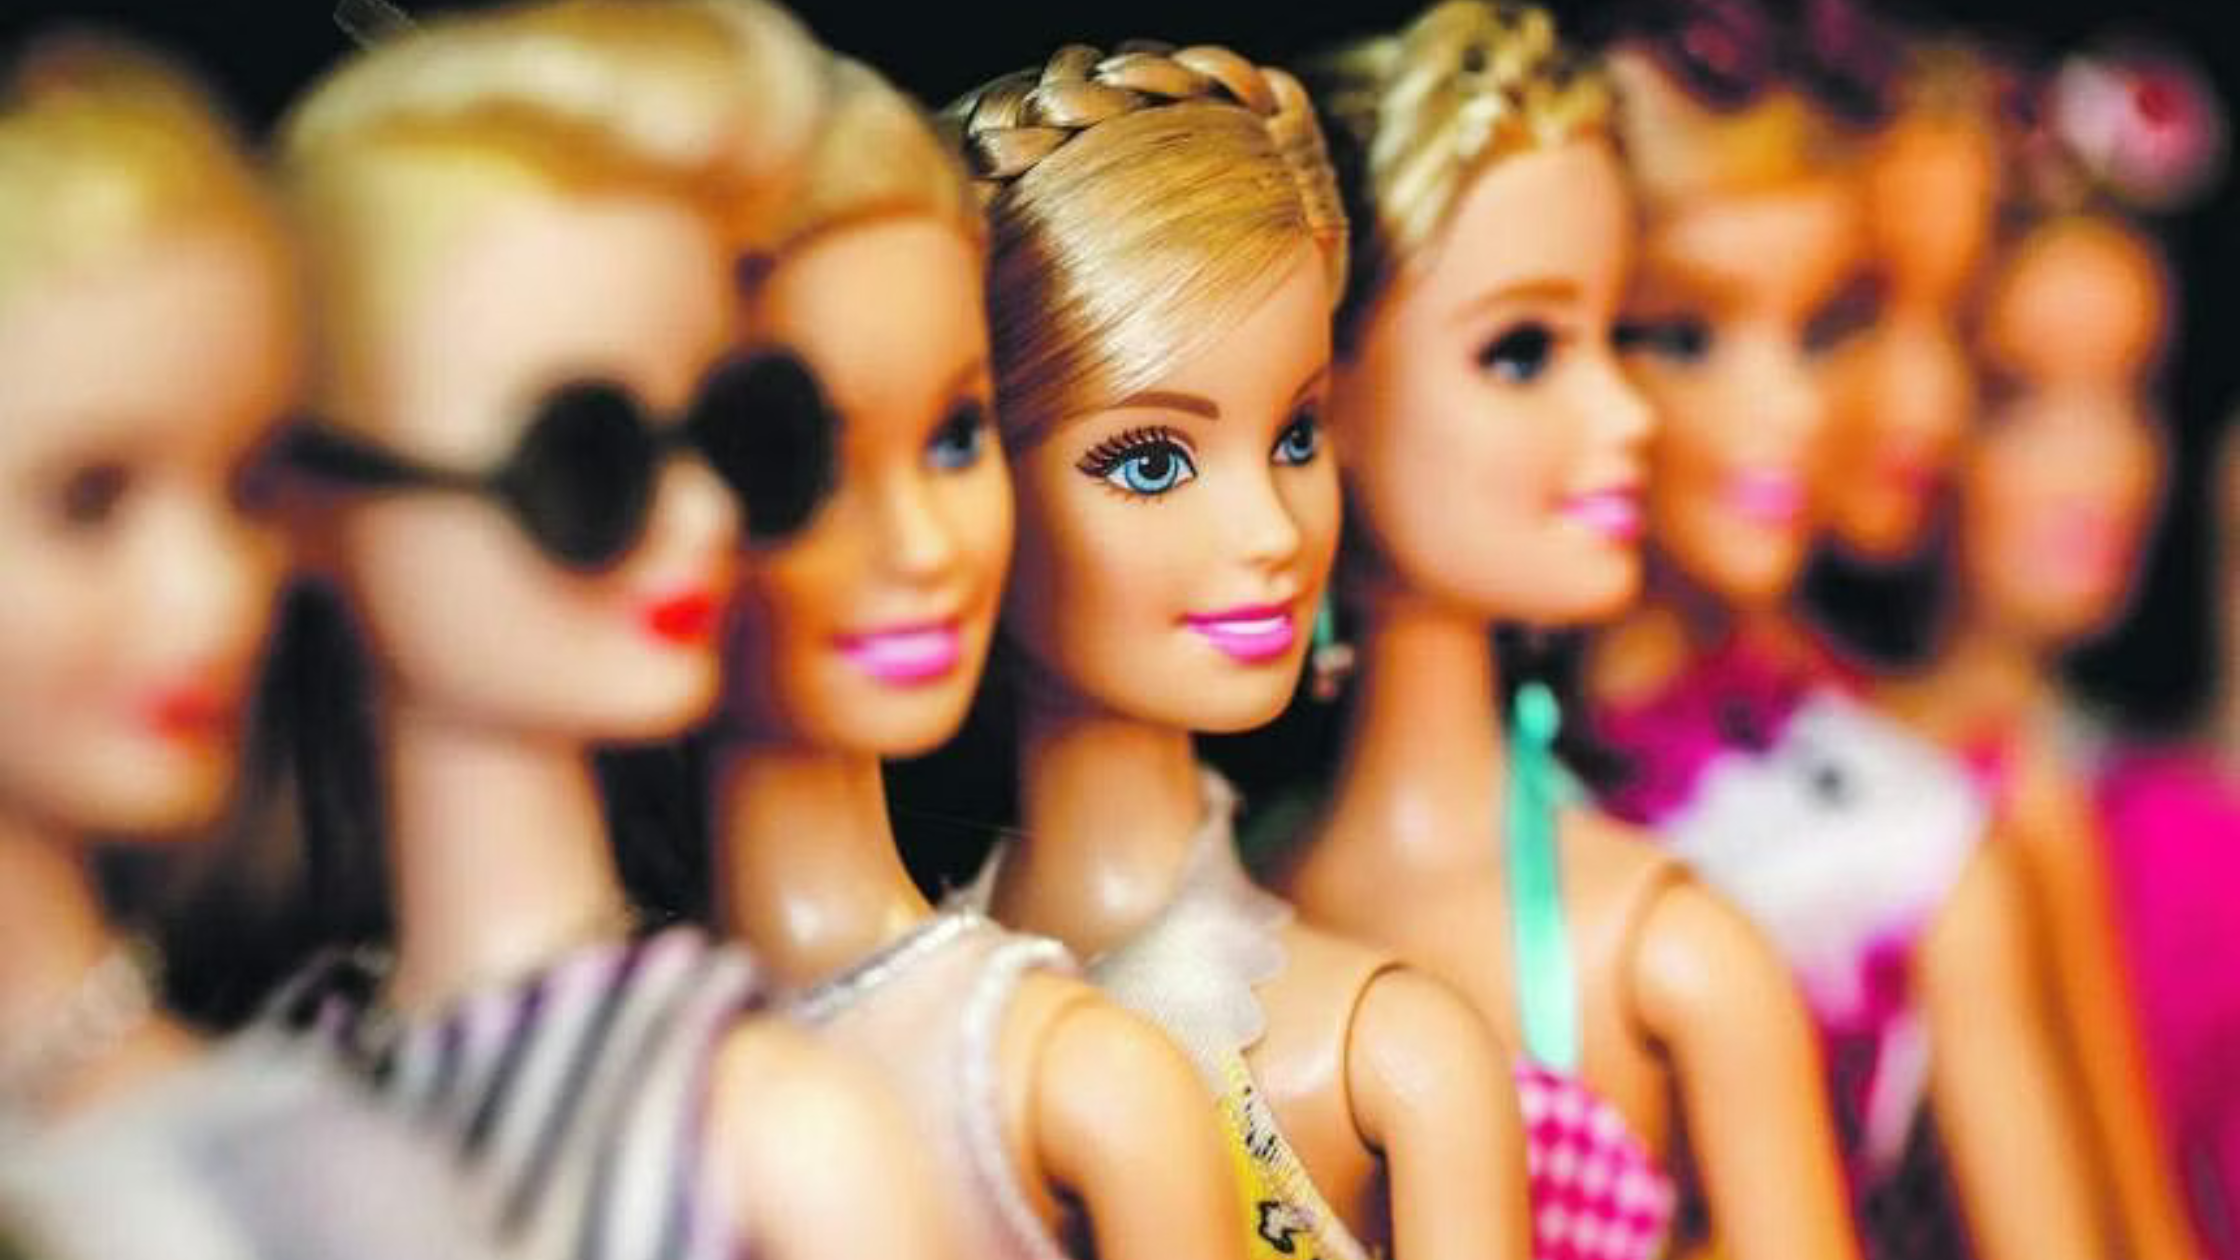 A Look at Barbie's Style Evolution and Forgotten Friends